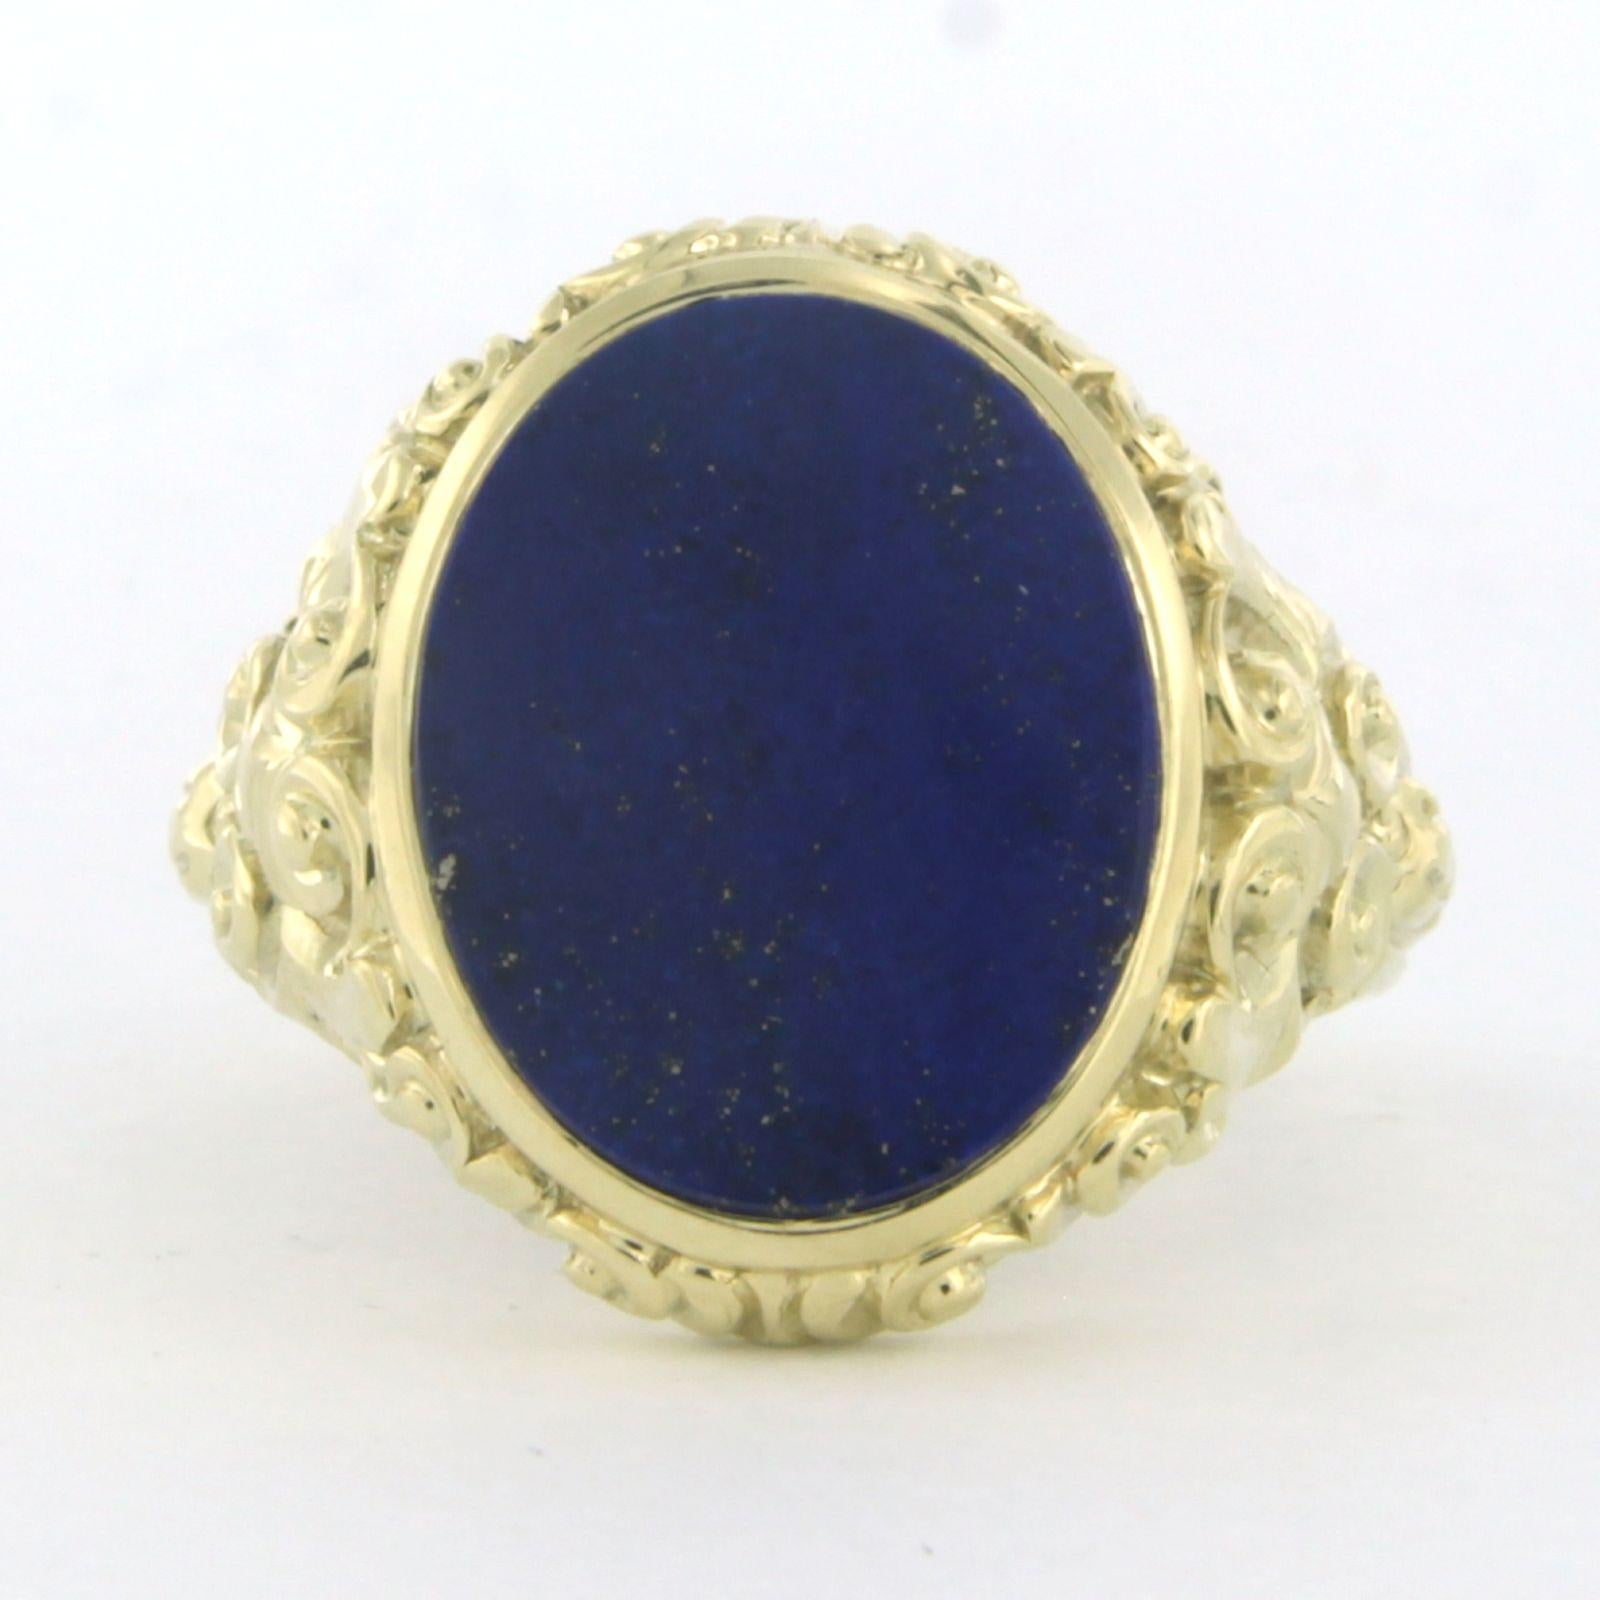 14k yellow gold ring set with lapis lazuli - ring size US 8.25 - EU. 18.5 (58)

detailed description:

the front of the ring is 2.0 cm wide

weight: 10.2 grams

ring size US 8.25 - EU. 18.5 (58). The ring can be enlarged or reduced a few sizes free